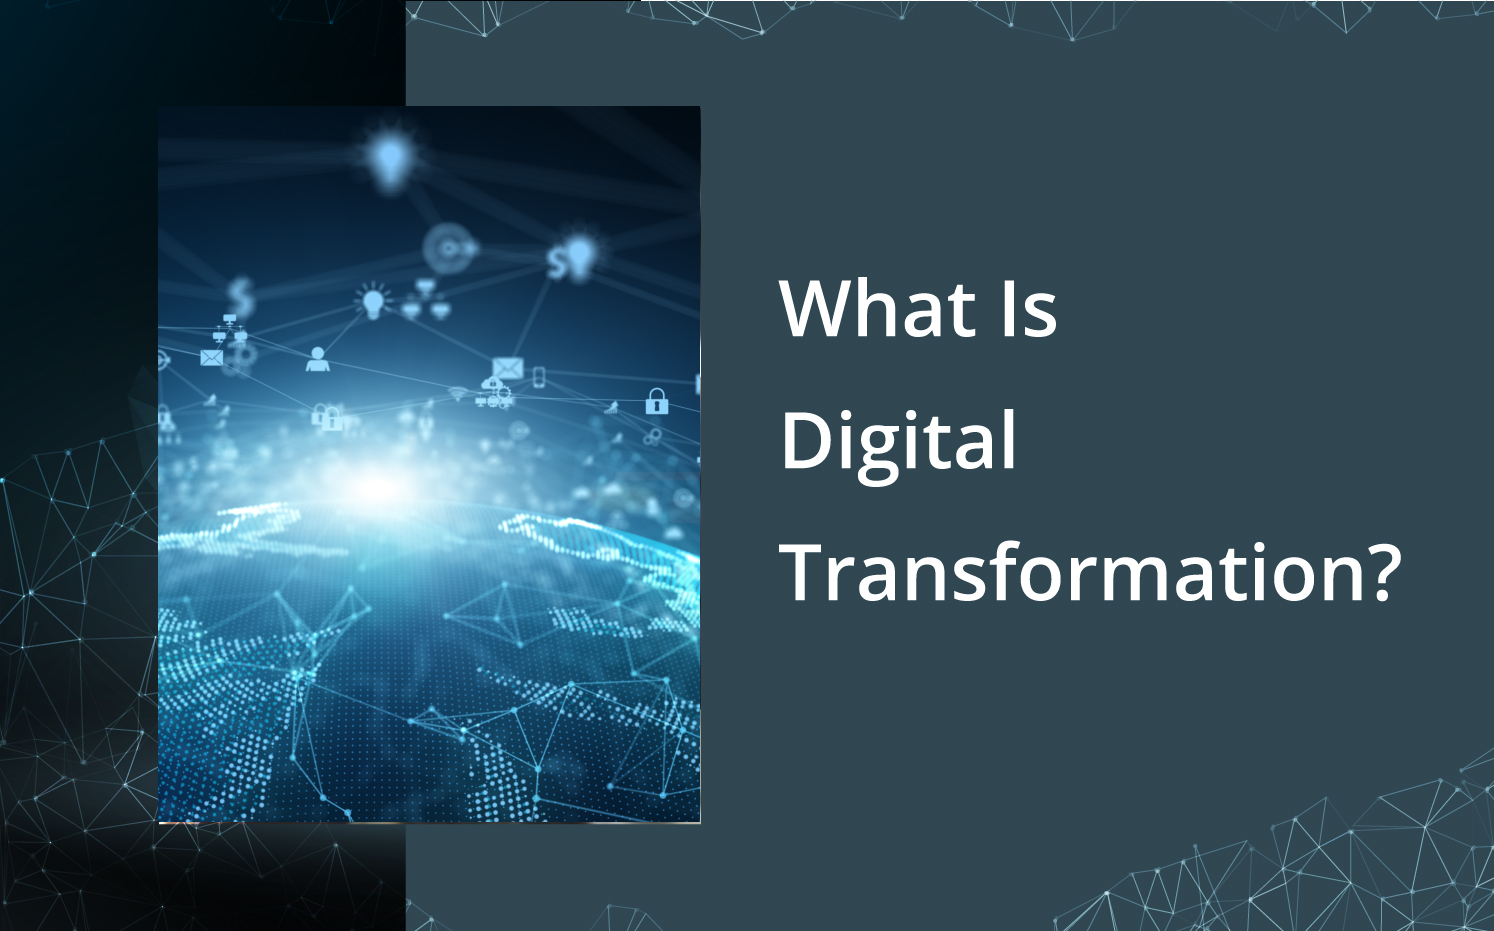 What is the future scope of digital transformation? - The CRM Team